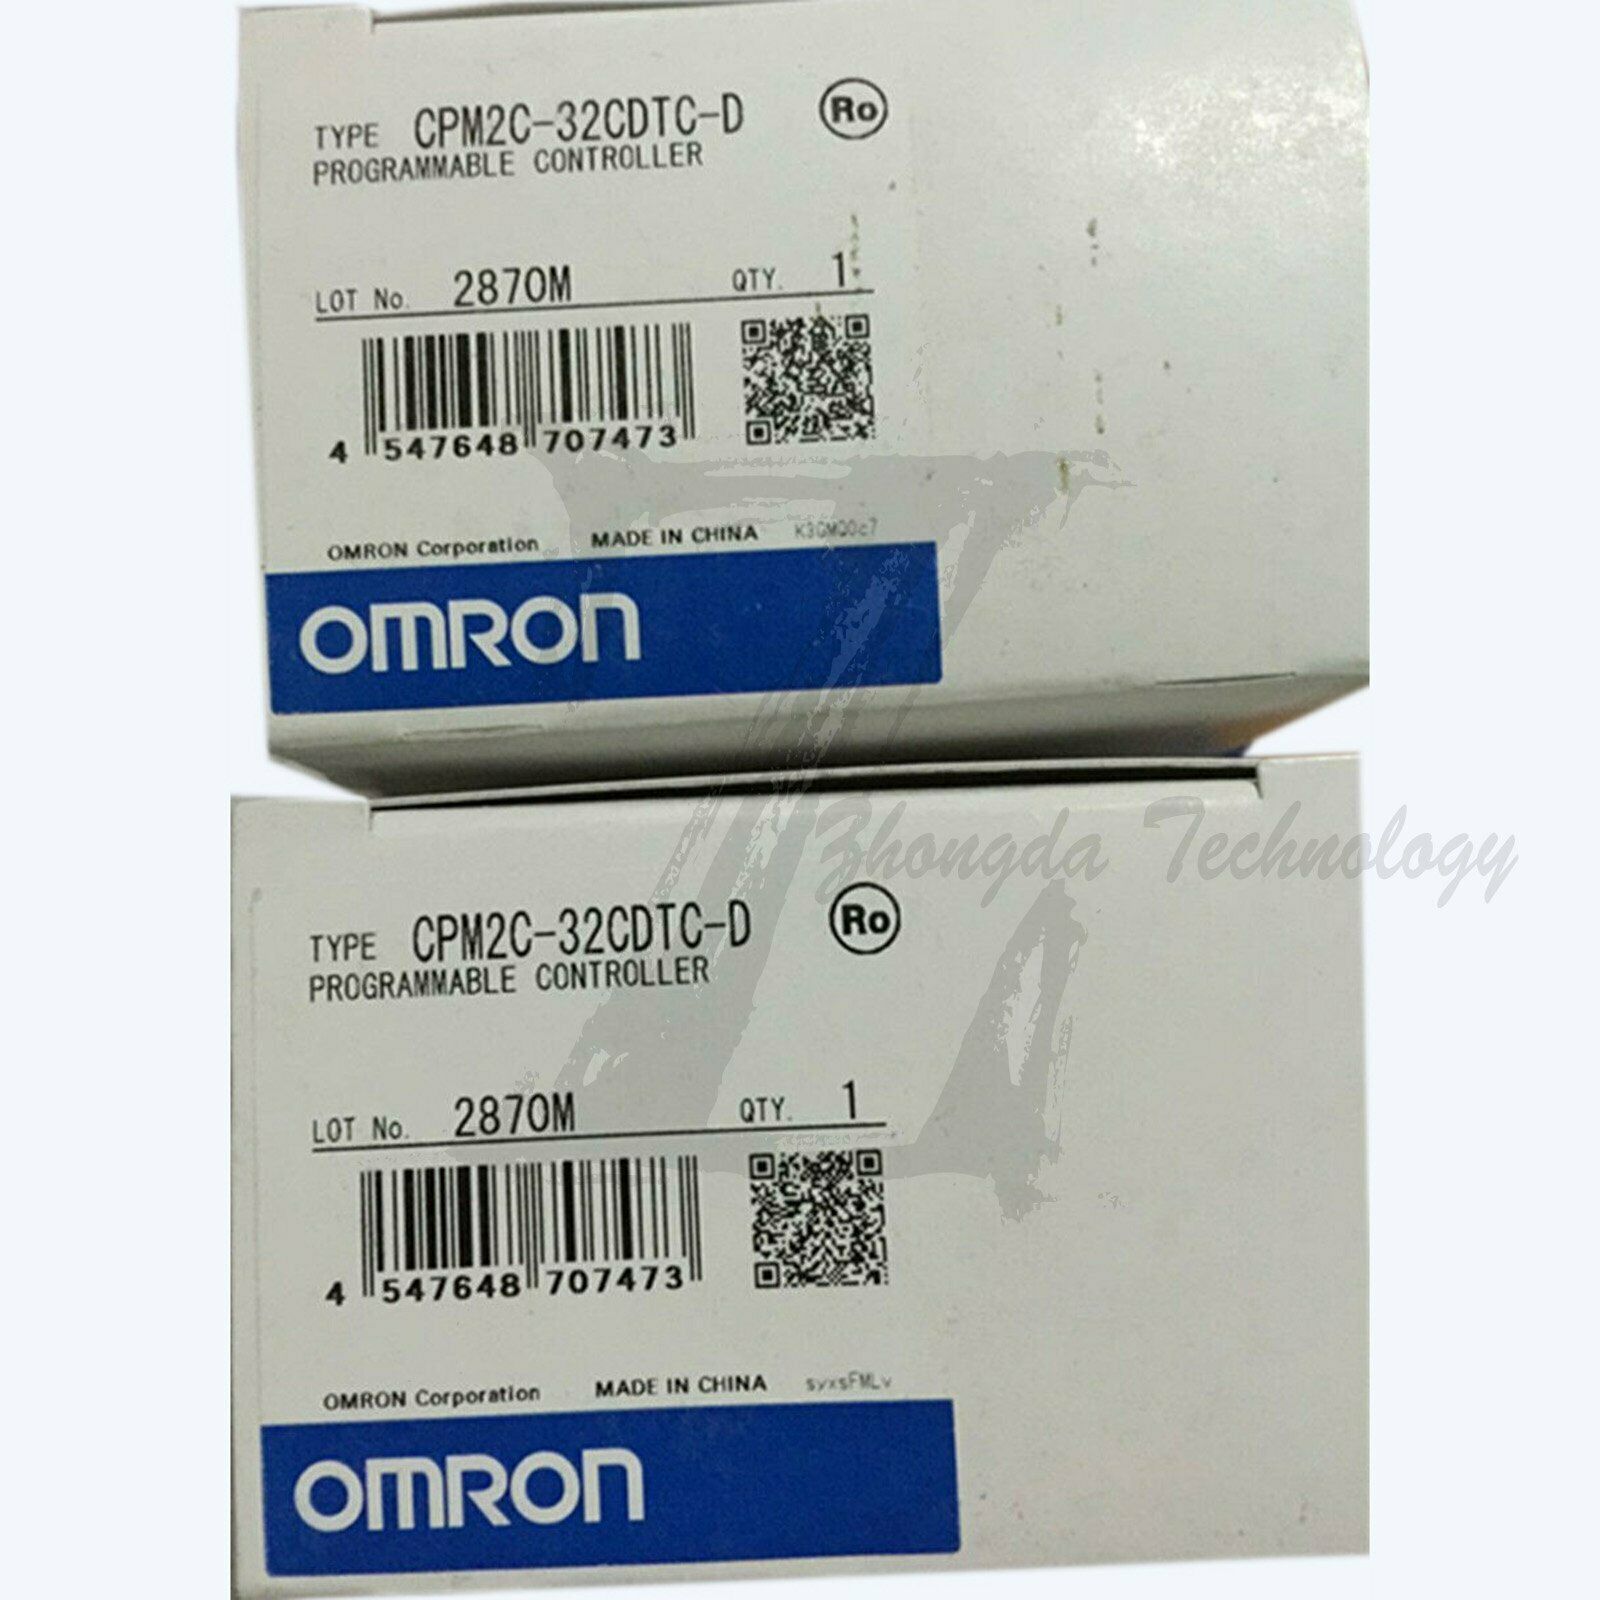 1pc new Omron CPM2C-32CDTC-D module one year warranty KOEED 201-500, 80%, import_2020_10_10_031751, Omron, Other